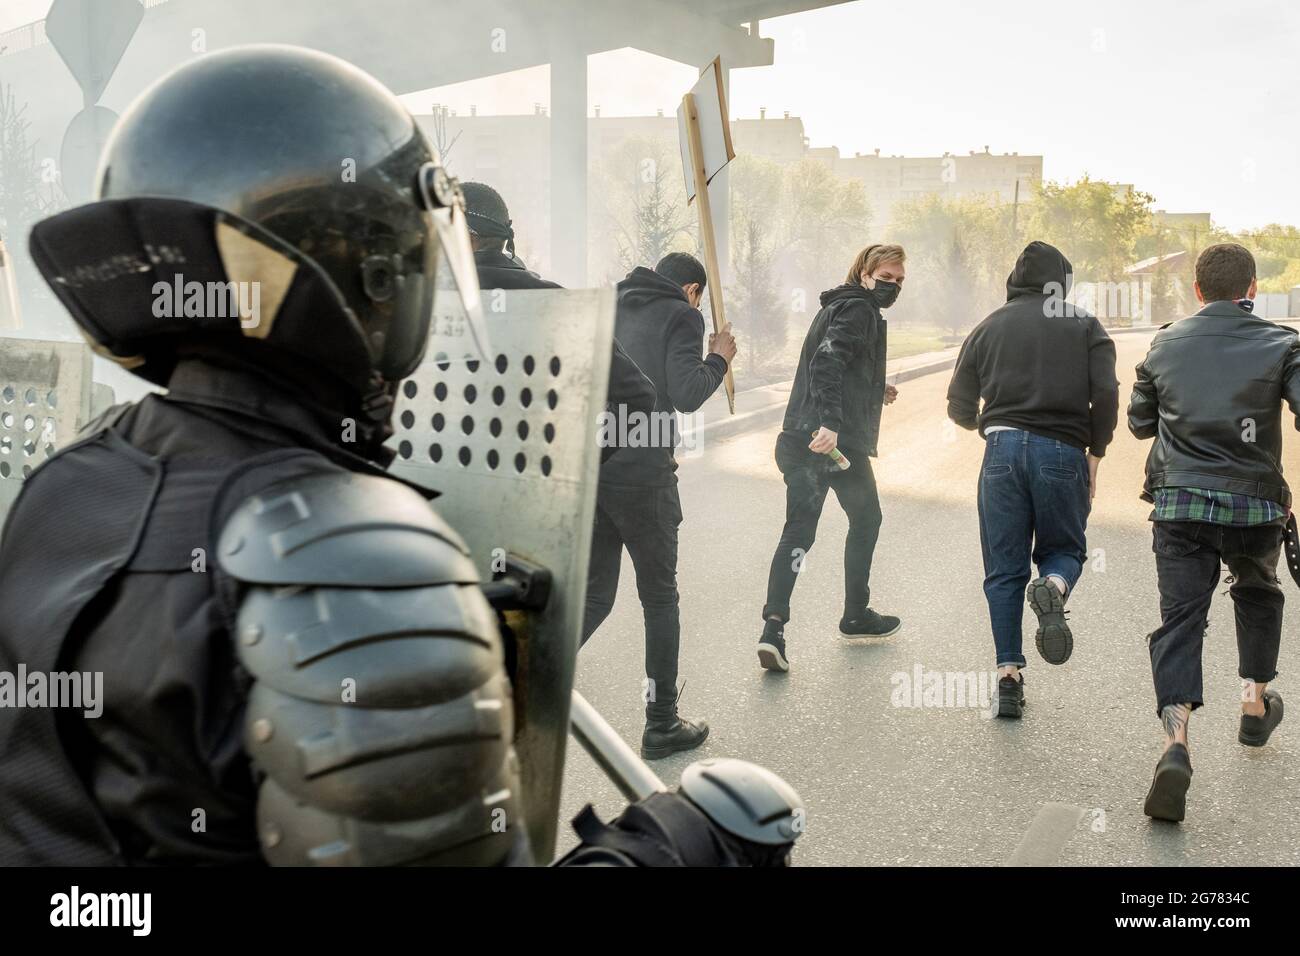 Police forces in helmets holding riot shields moving to running hooligans while stopping them in city Stock Photo